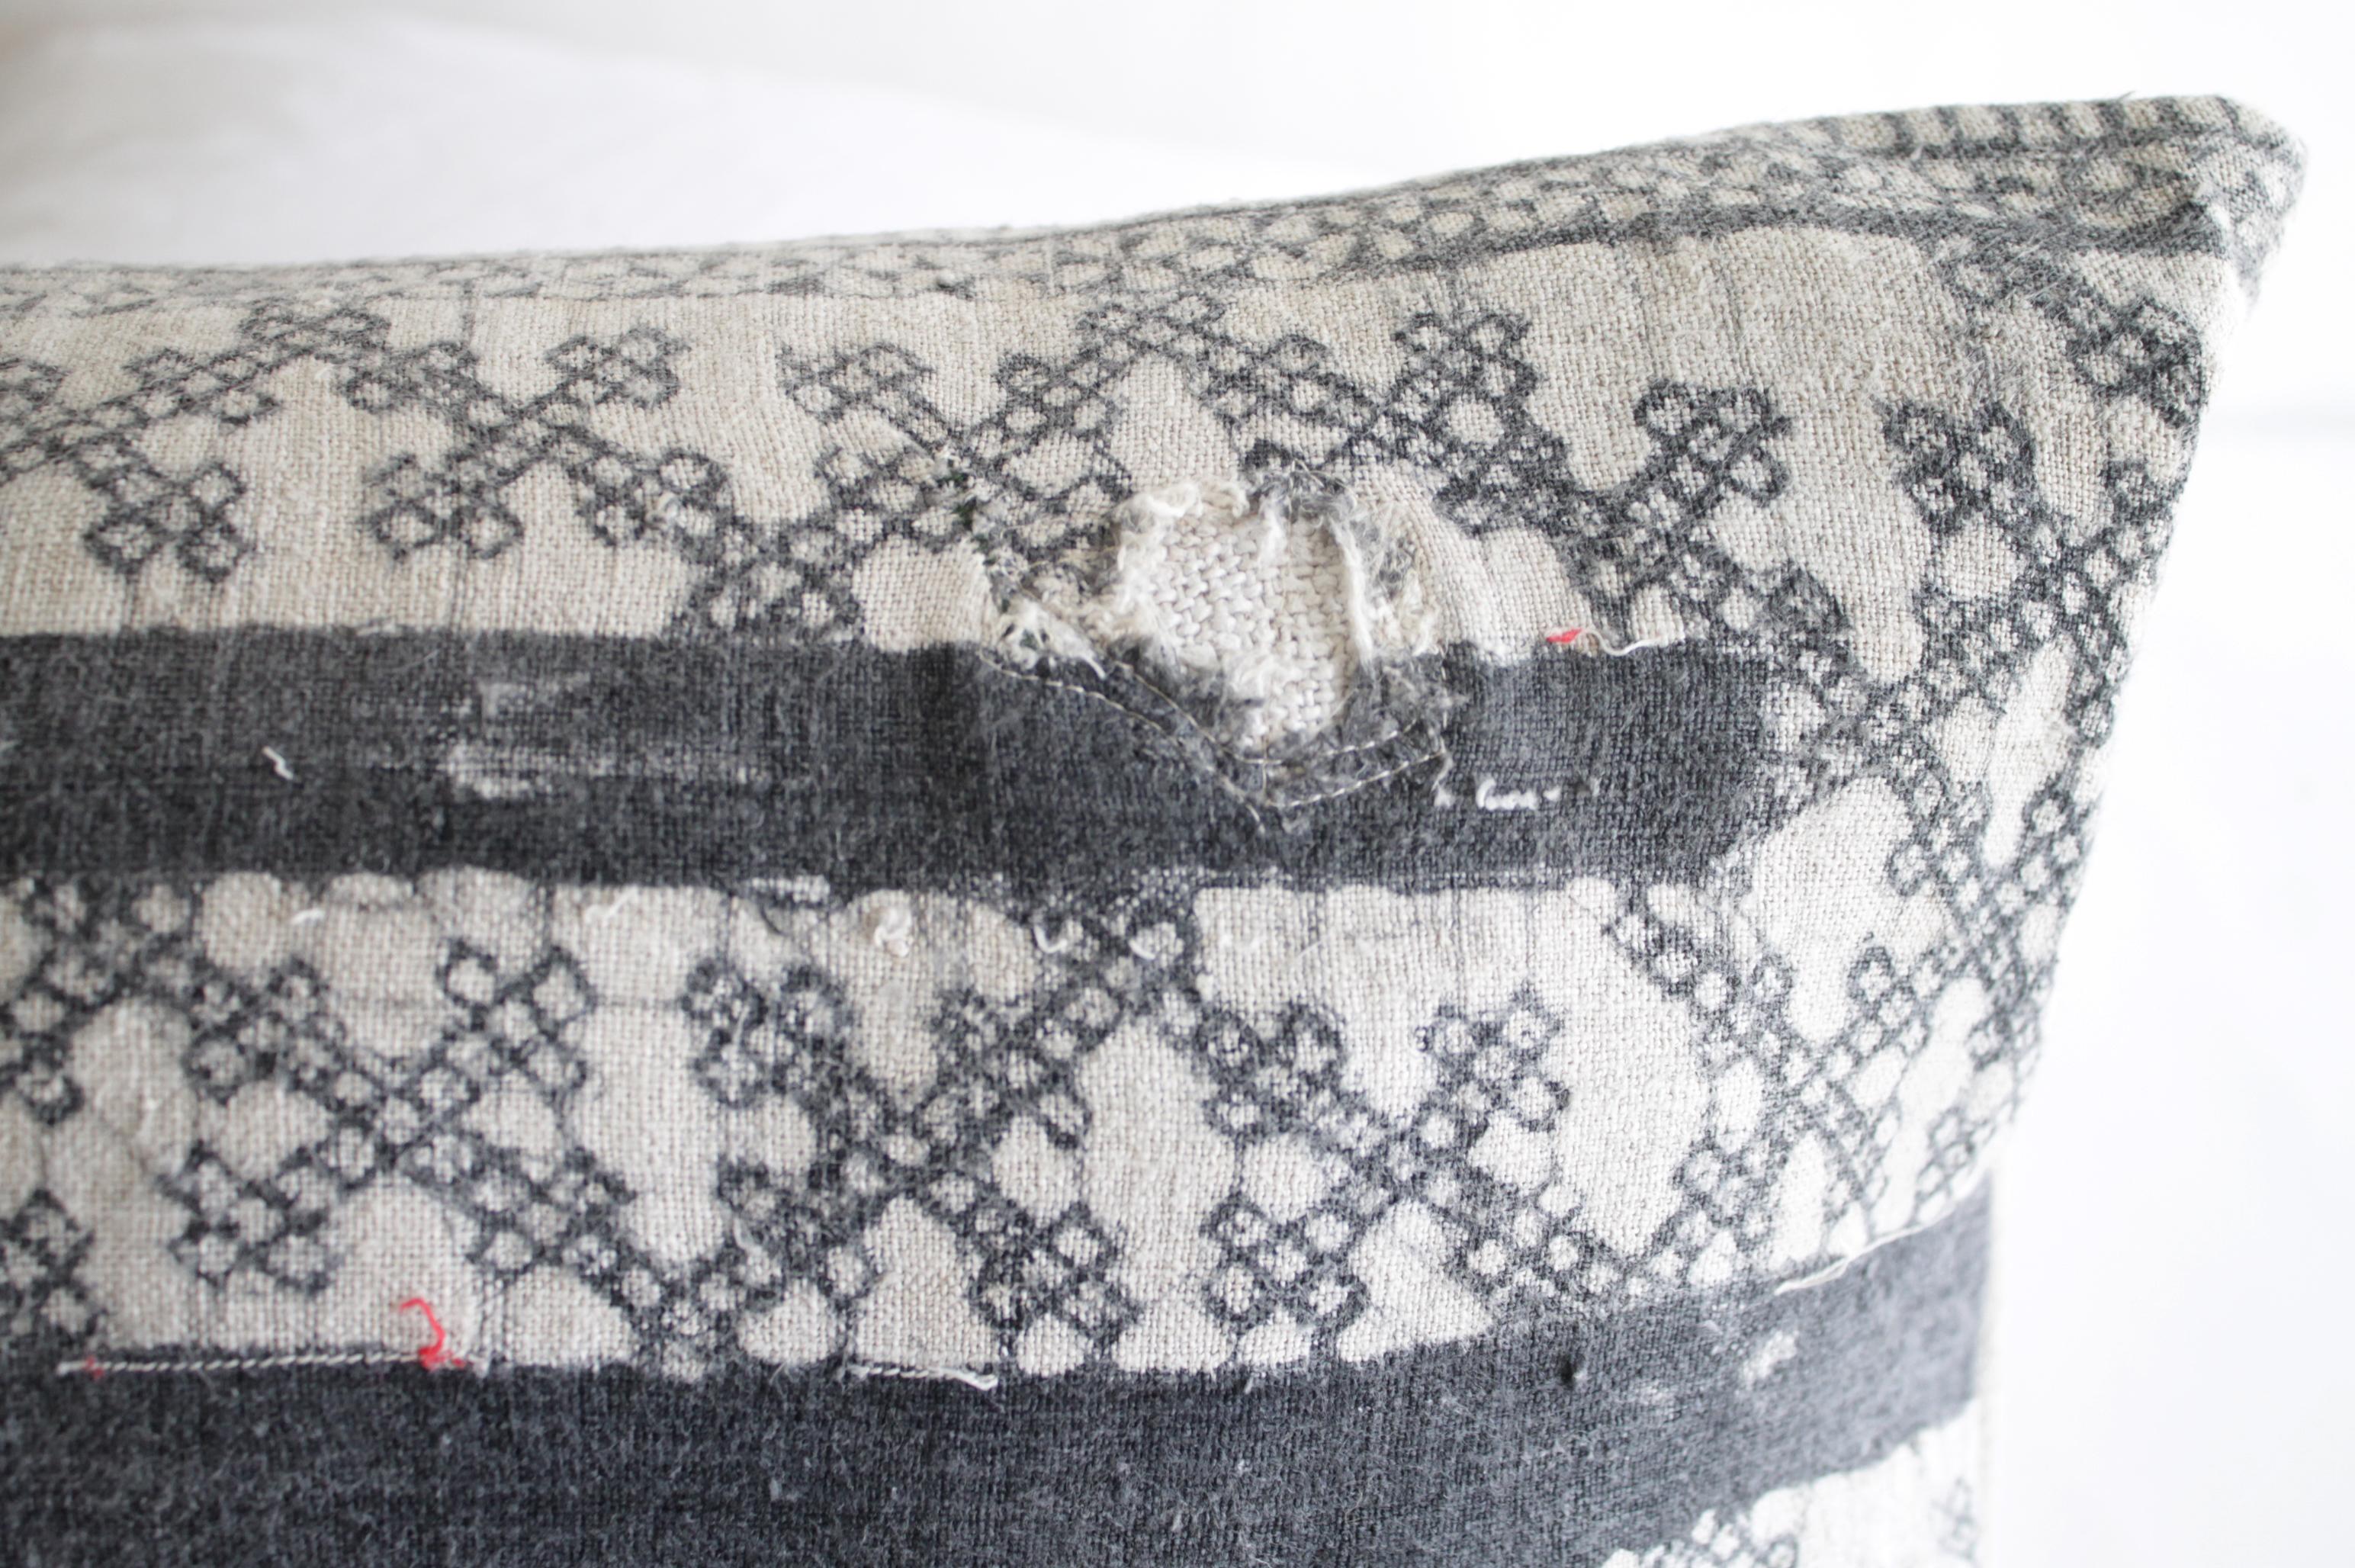 Vintage batik accent pillow in dark grey with natural linen
Face of this pillow is a beautiful off-white/ natural color with dark charcoal colored lines and patterns. A small grain sack patch gives this its unique character.
A solid natural linen